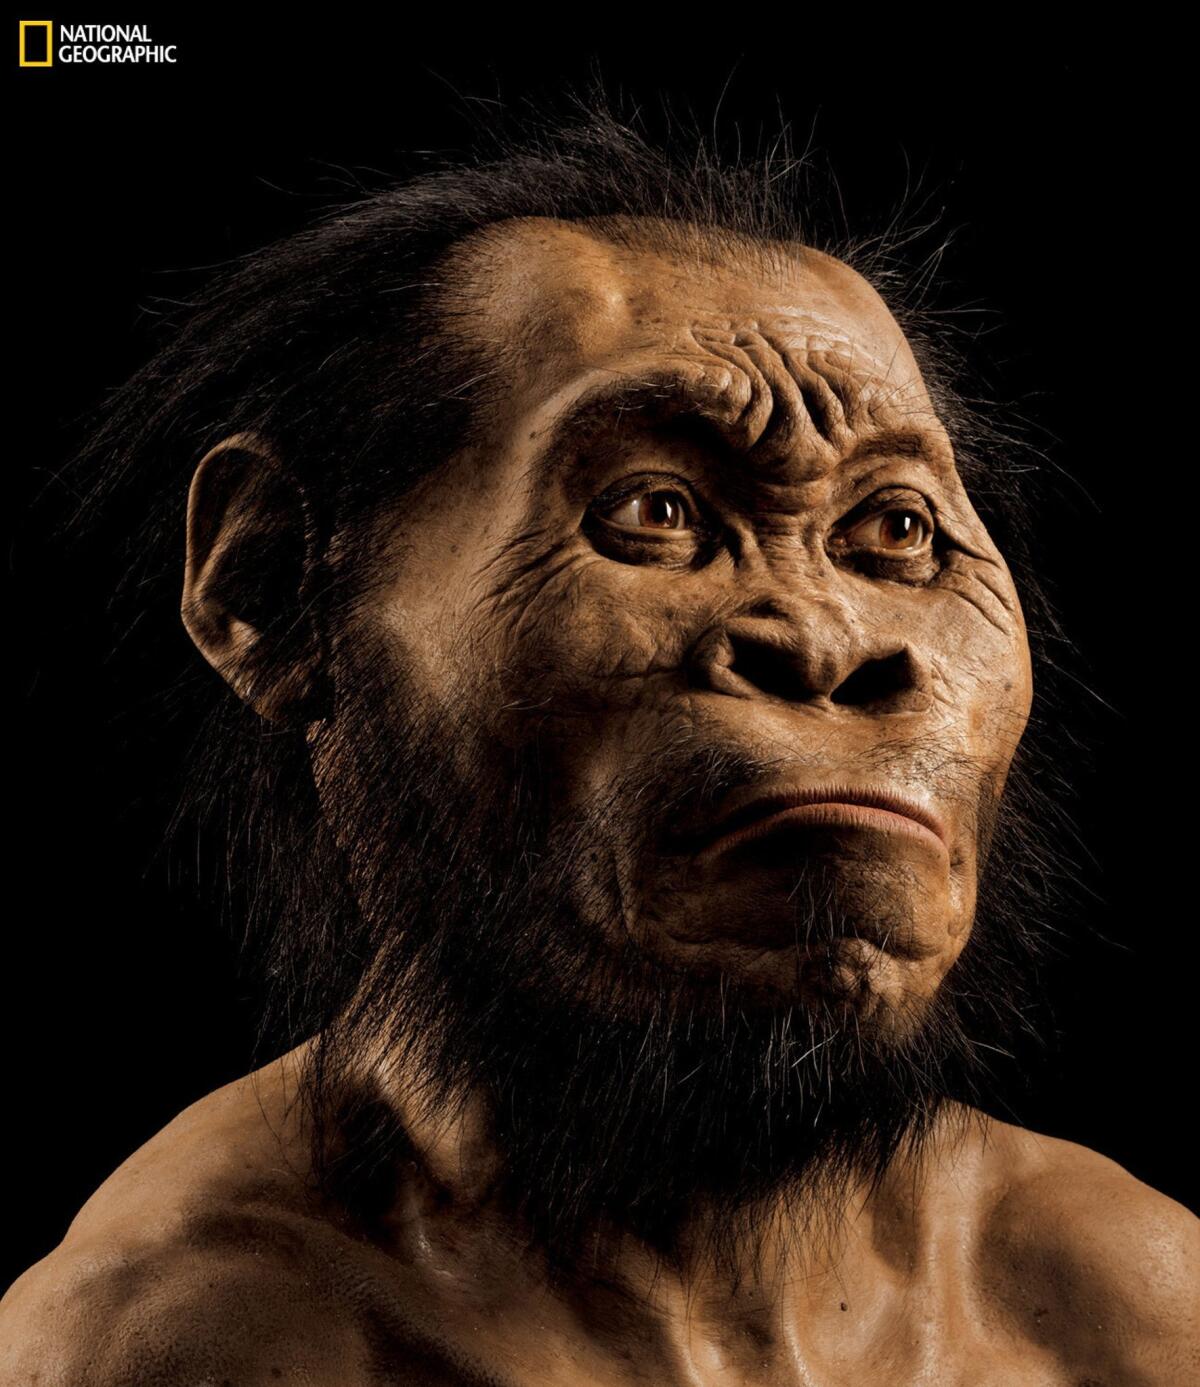 This photo provided by National Geographic from their October 2015 issue shows a reconstruction of Homo naledi's face by paleoartist John Gurche at his studio in Trumansburg, N.Y. Scientists say fossils found deep in a South African cave revealed the new member of the human family tree.